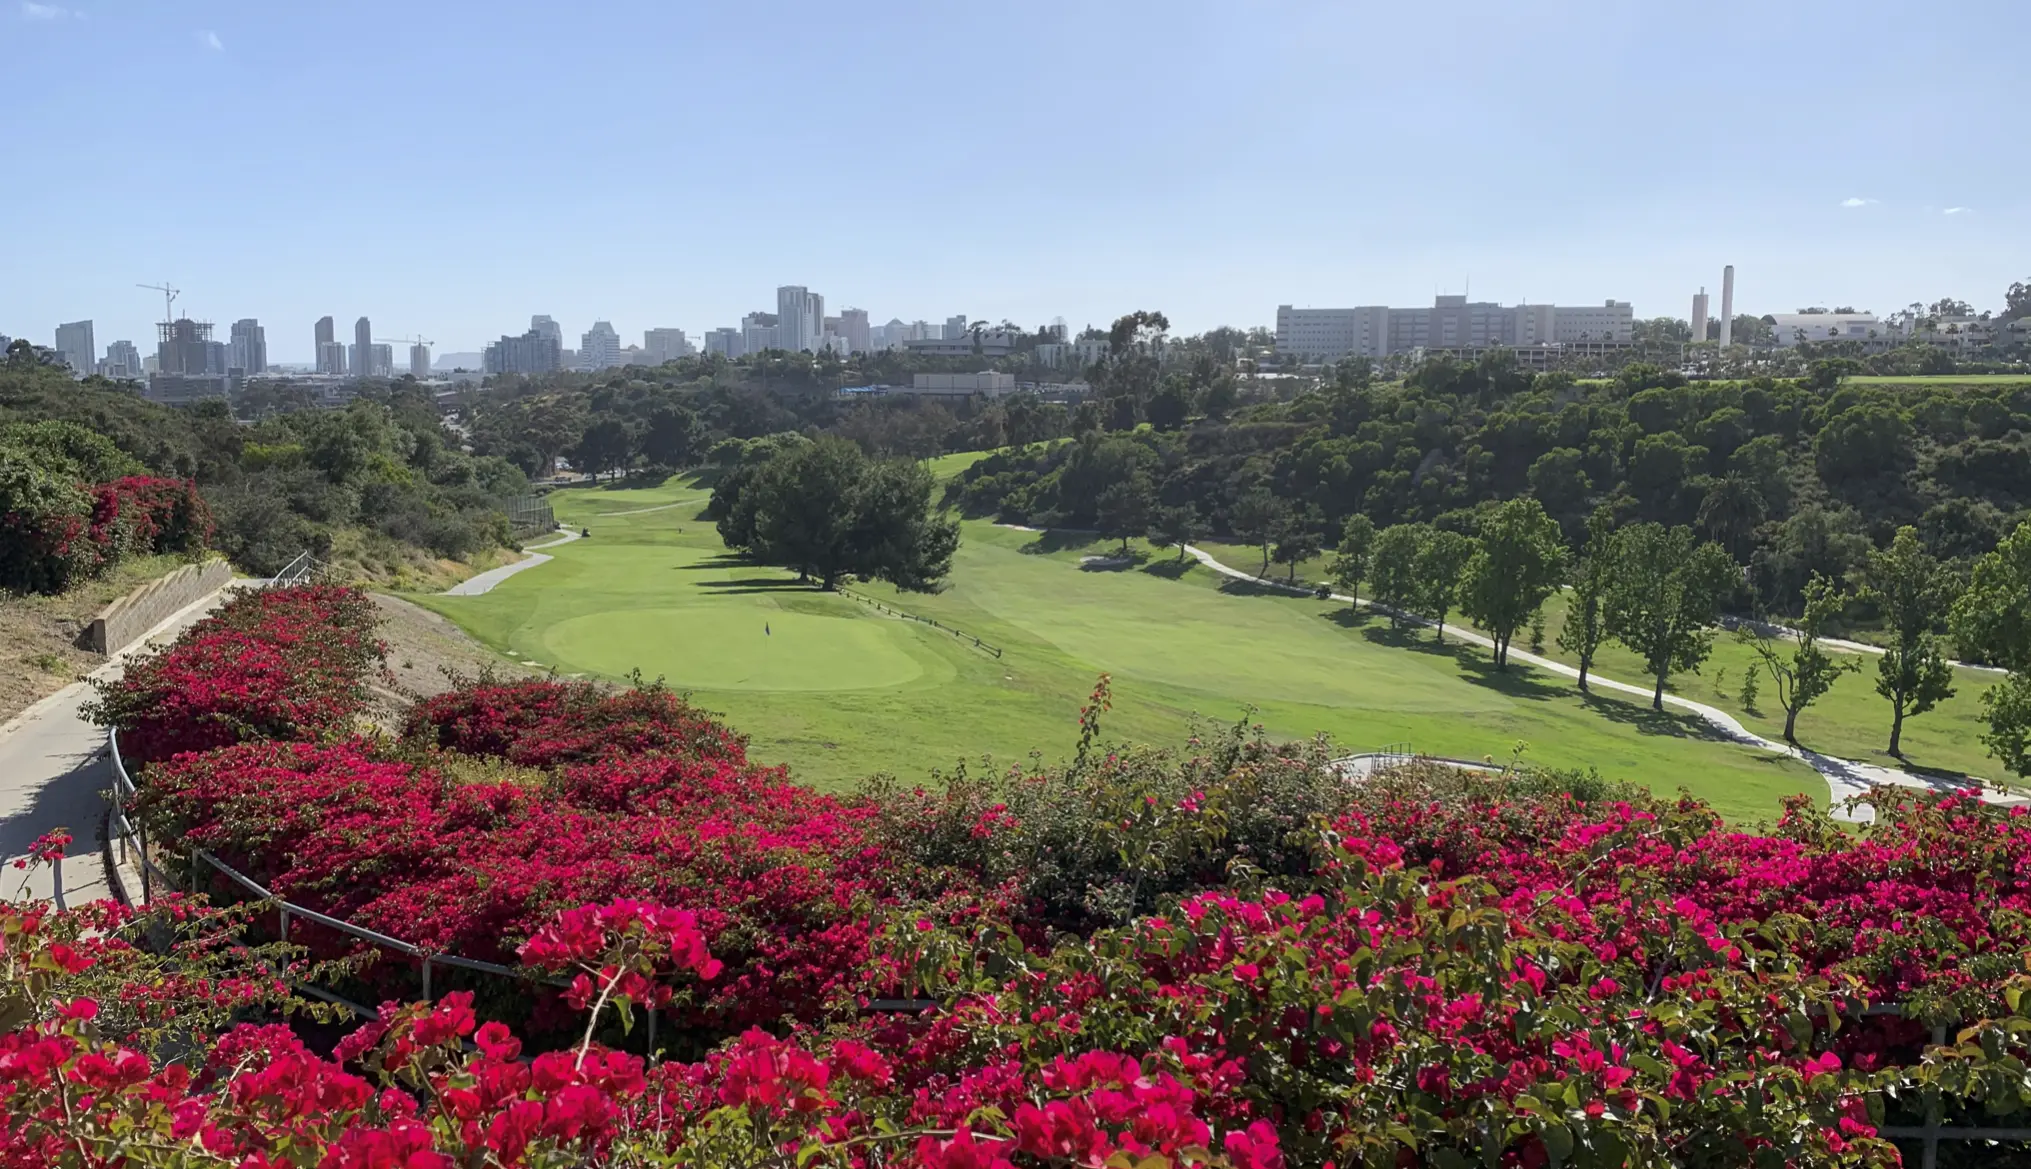 A panoramic view of the Balboa Park golf course with red flowers in the foregorund and downtown San Diego buildings in the background.